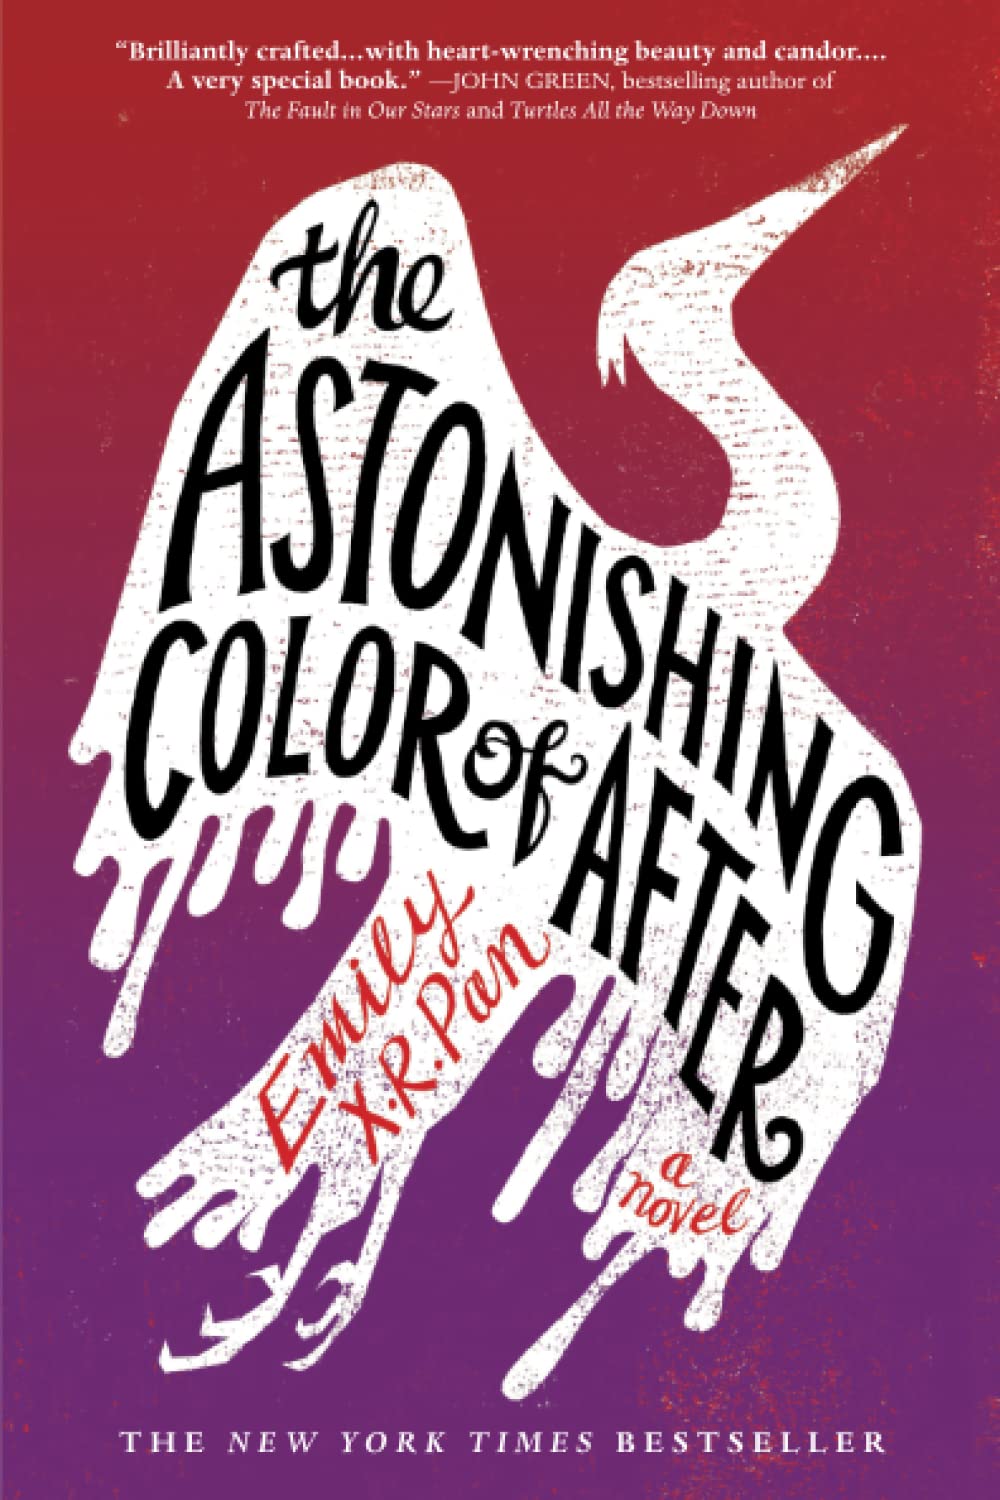 the astonsihing color